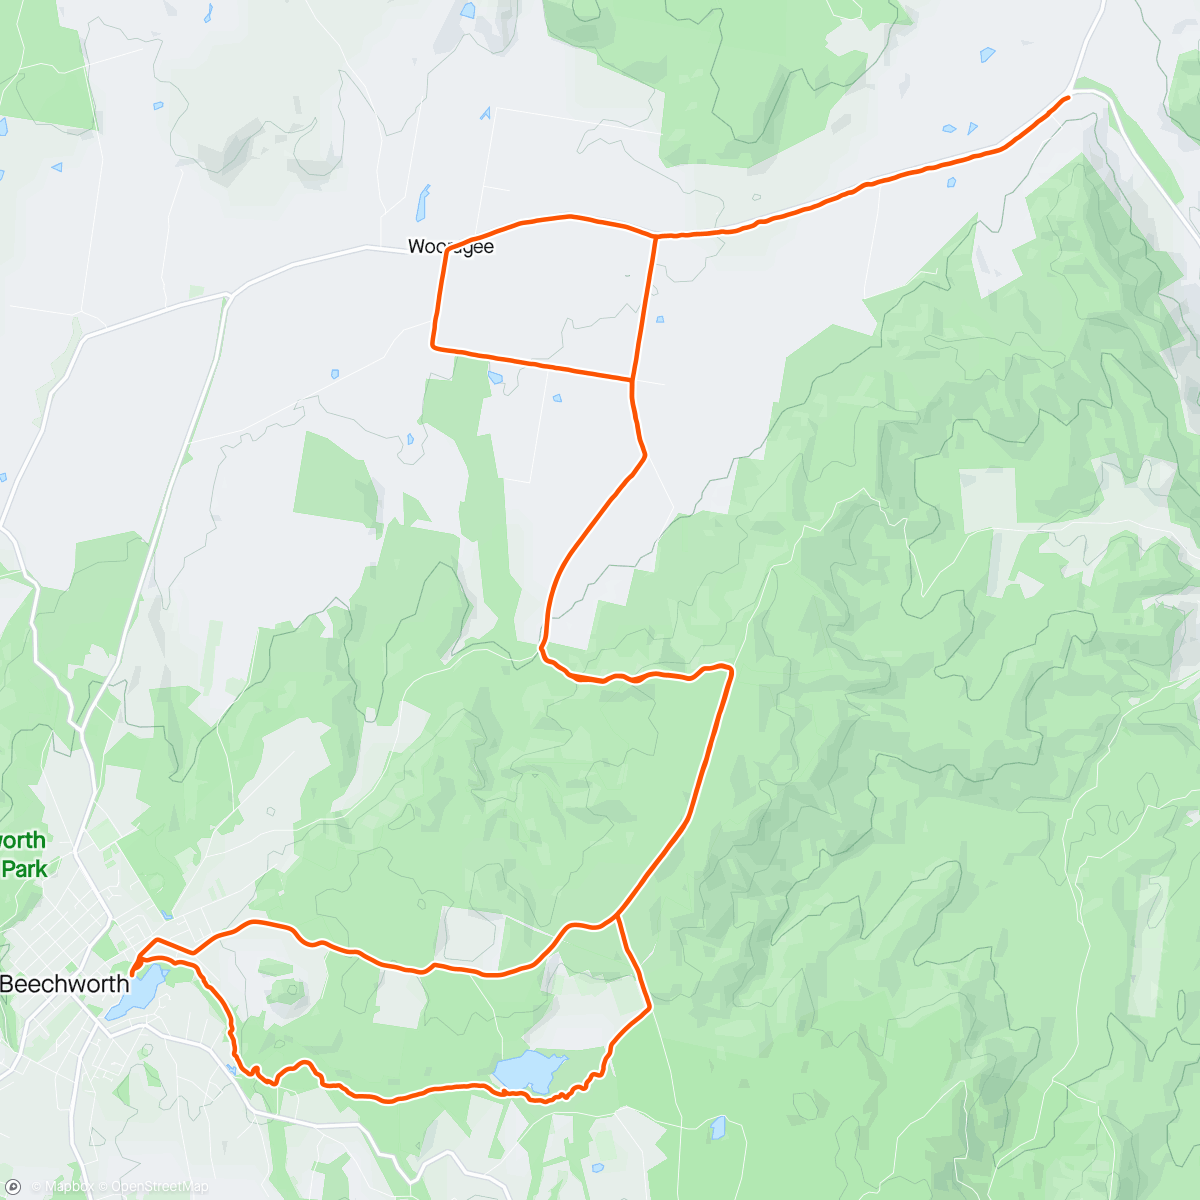 Kaart van de activiteit “Yackandandah Ridge and trails. 
Thx for part of the route AB, enjoyed the workout.  Cpl short steep hike a bike parts, but good riding once up top.”